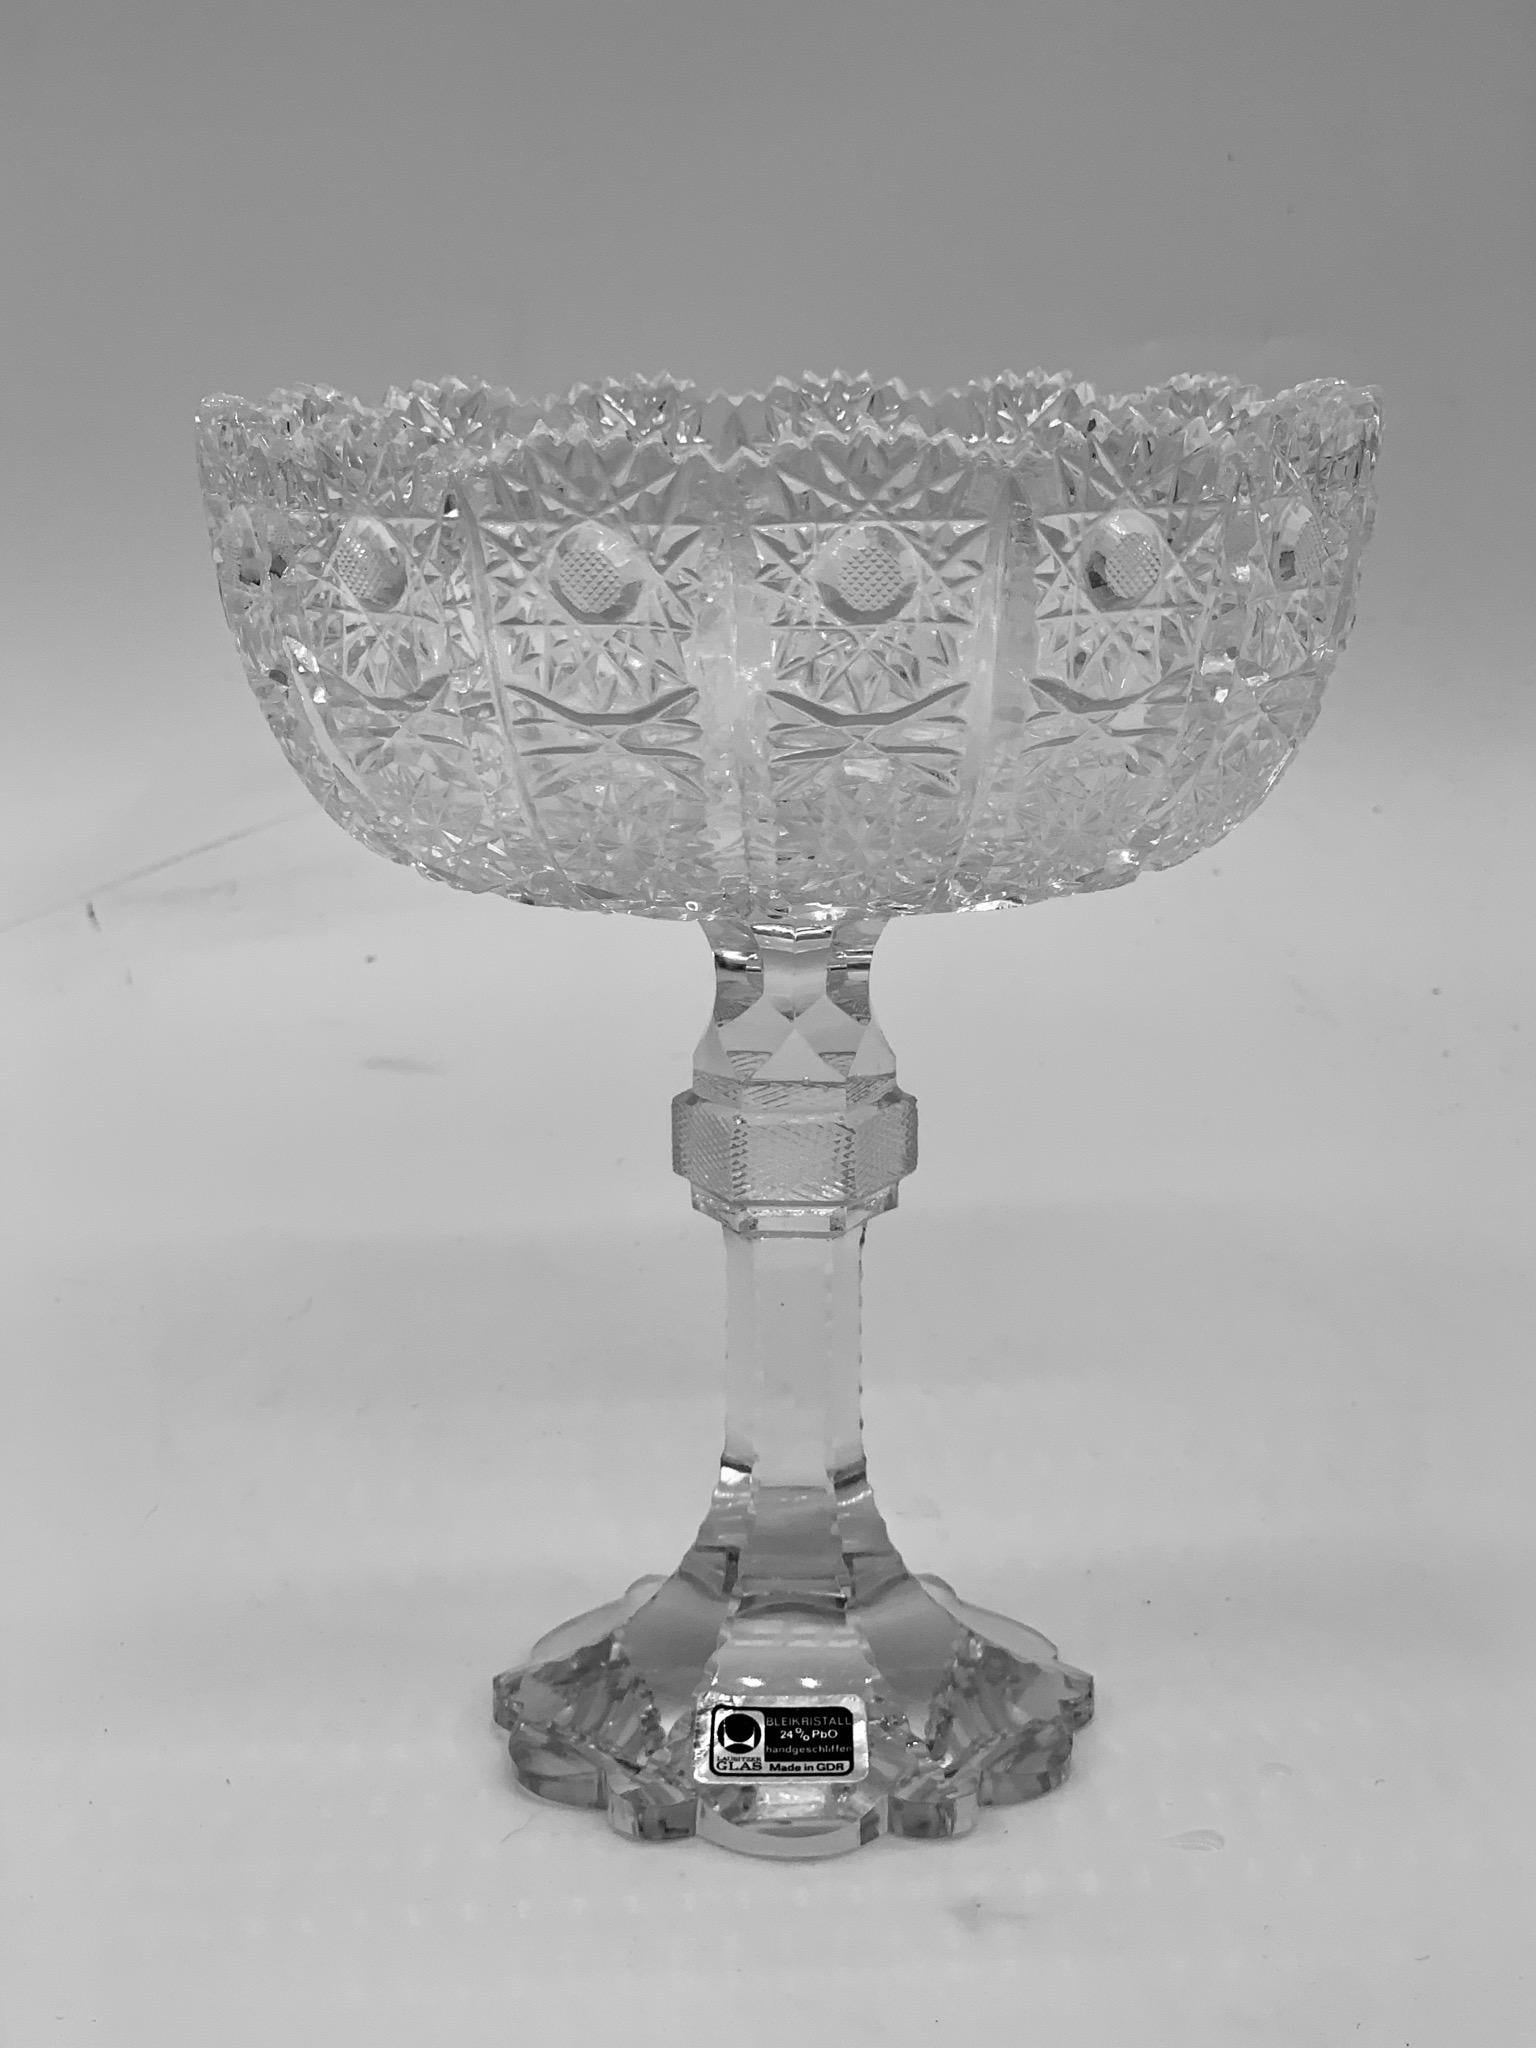 1945-1950 lead crystal serving bowl with stunning intricately cut patterns. Perfect as a centerpiece or as Serveware.